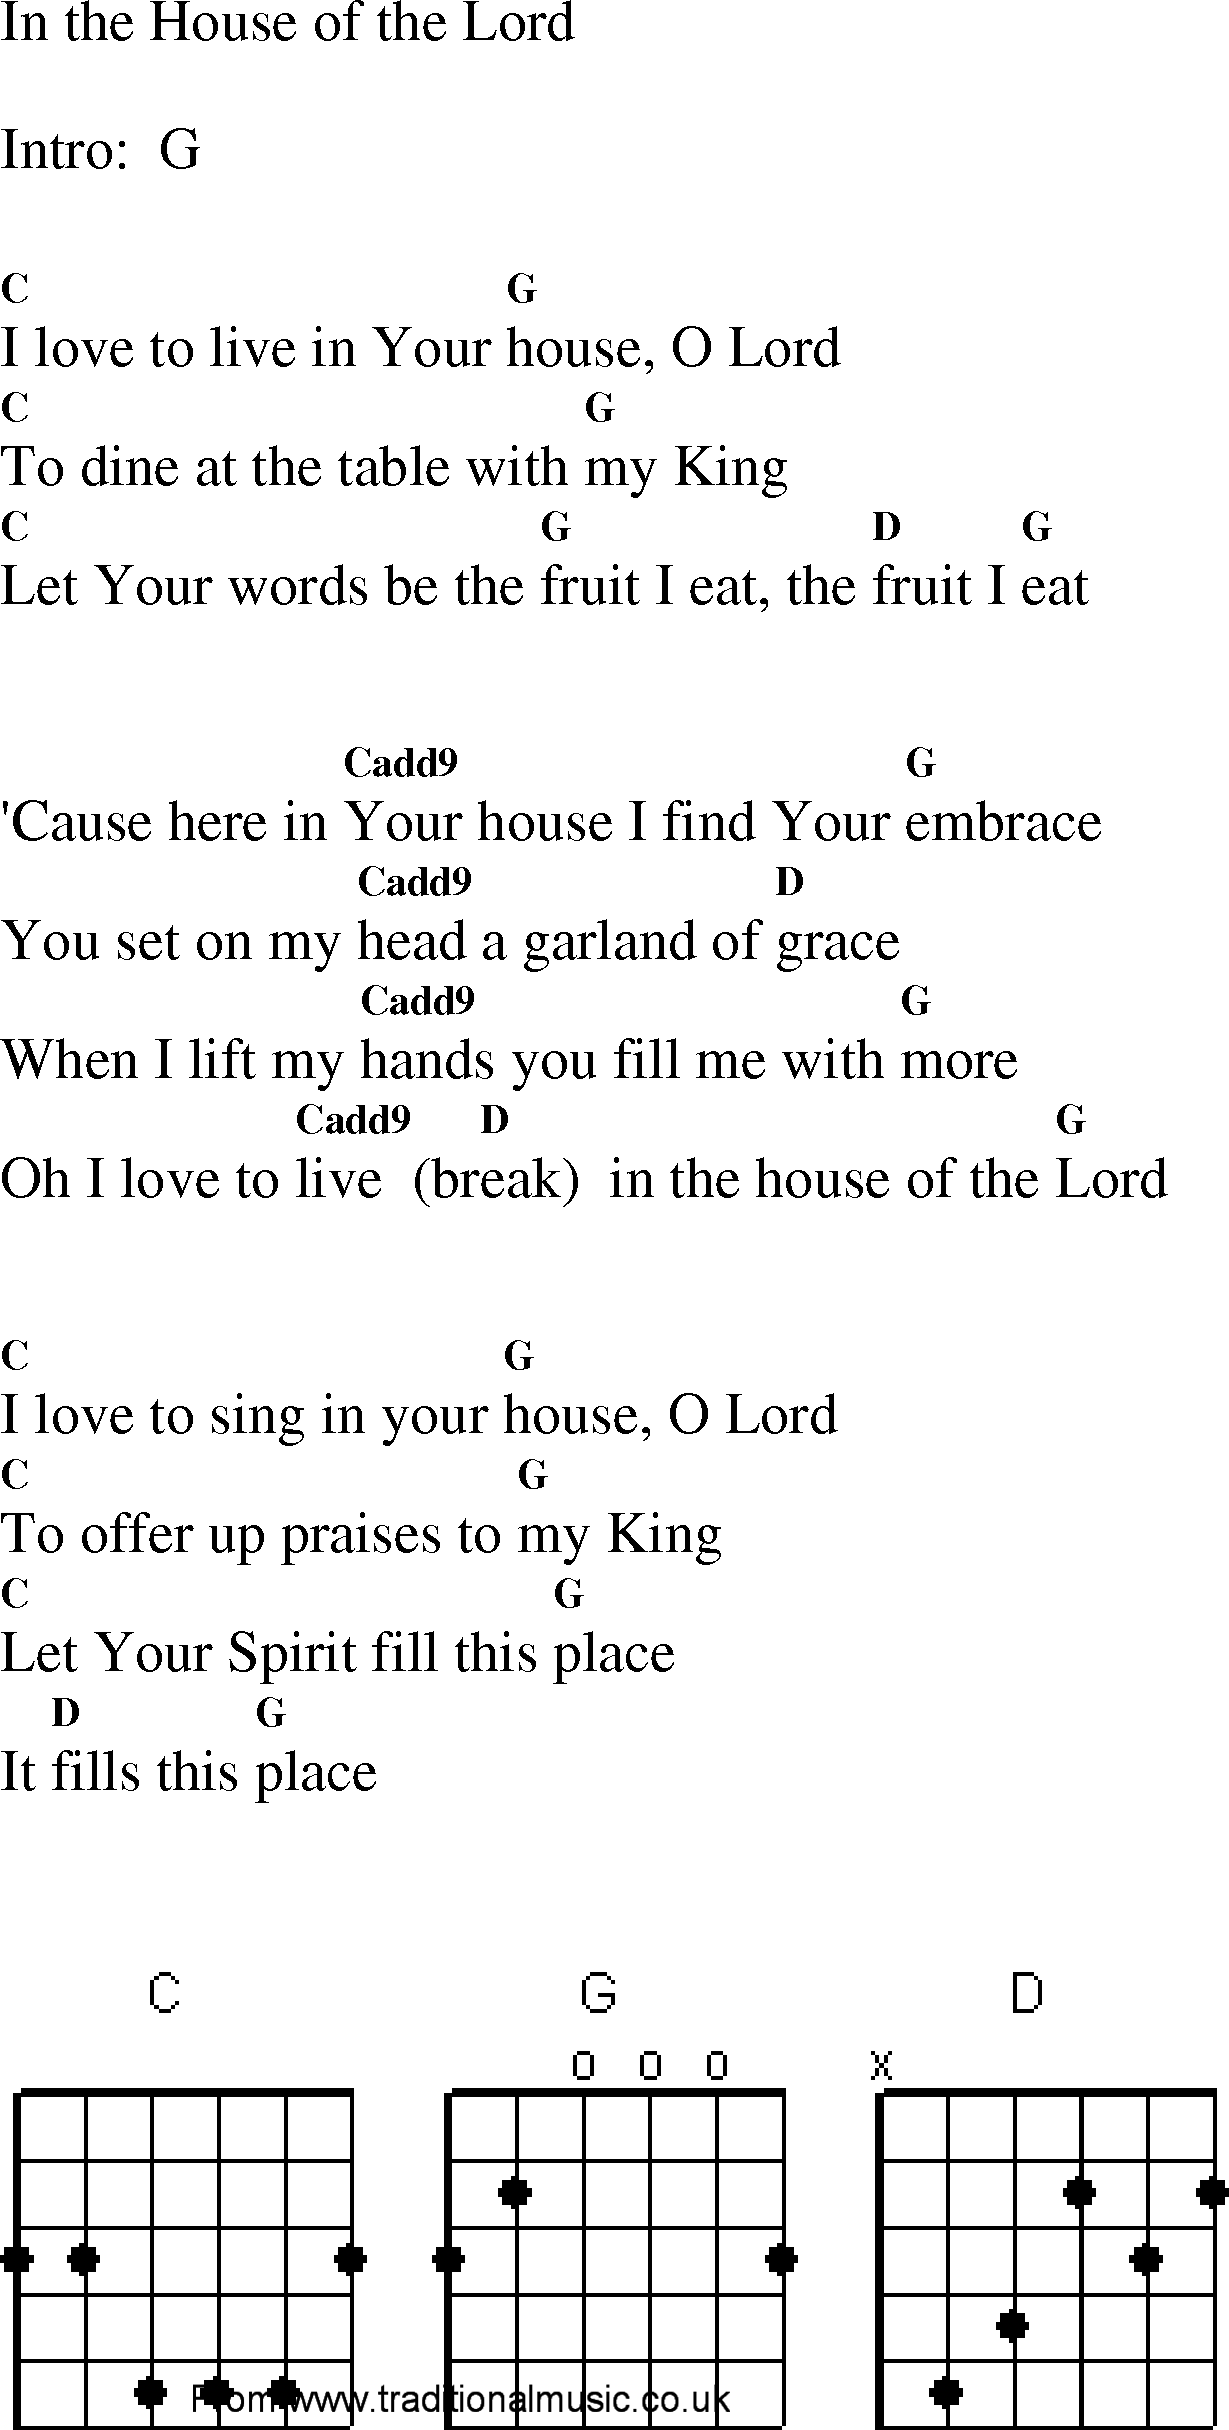 Gospel Song: in_the_house_of_the_lord, lyrics and chords.